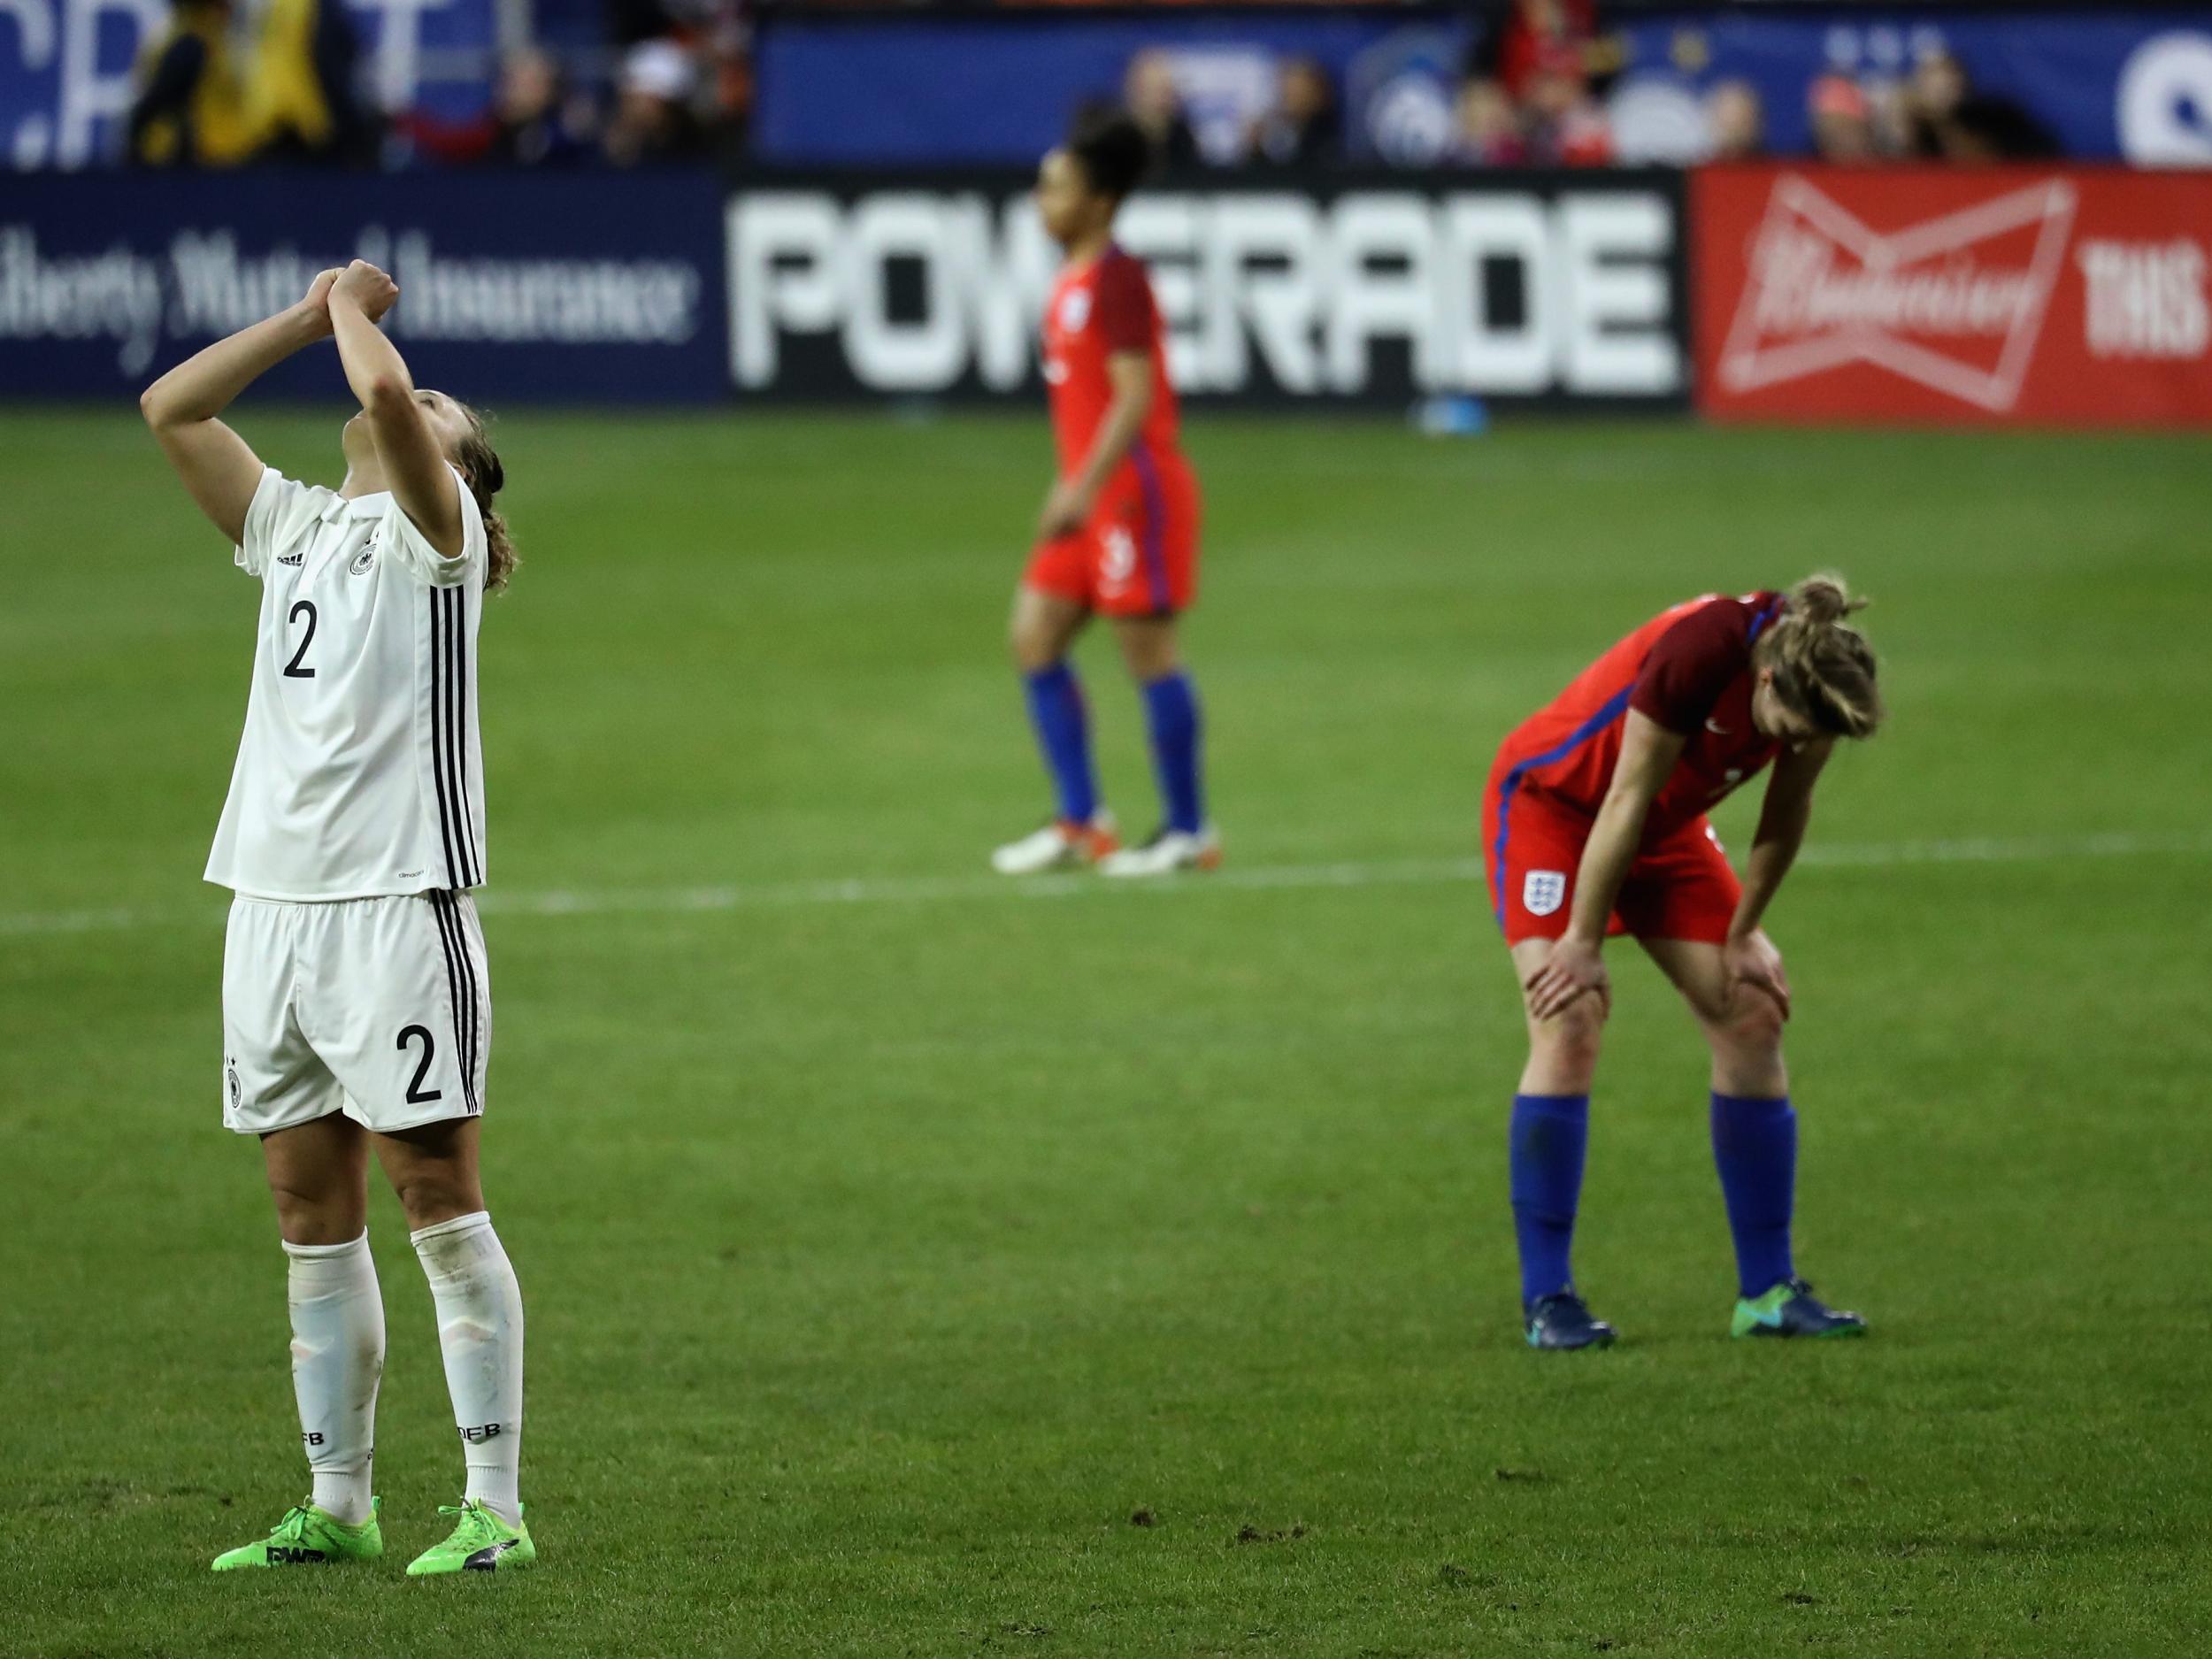 England couldn't see off Germany in the SheBelieves Cup